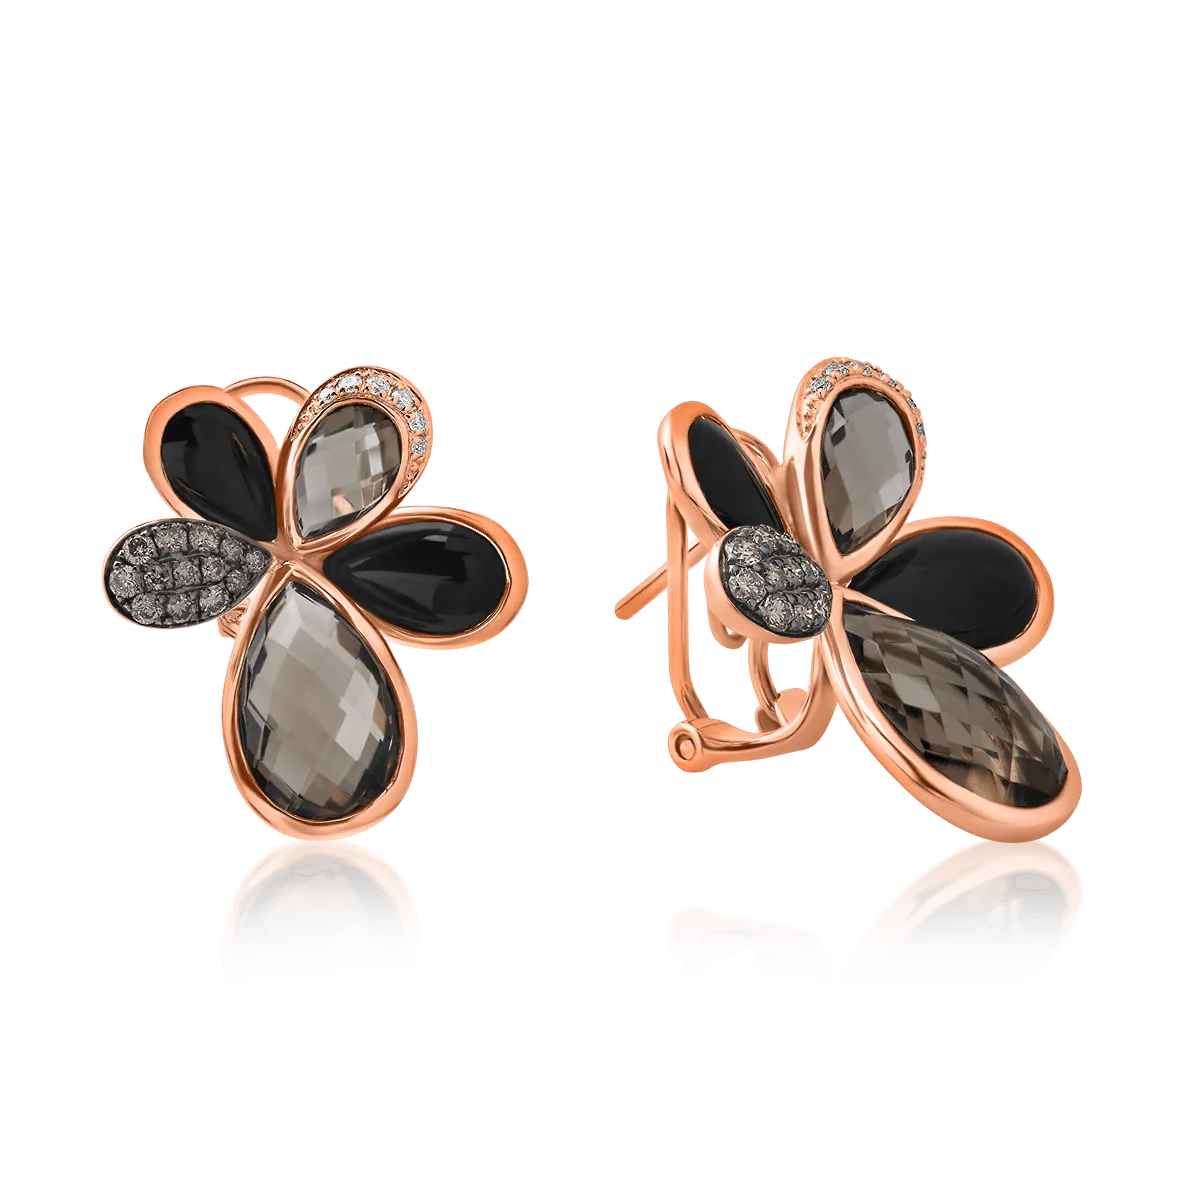 18K rose gold earrings with 13.96ct precious and semi-precious stones